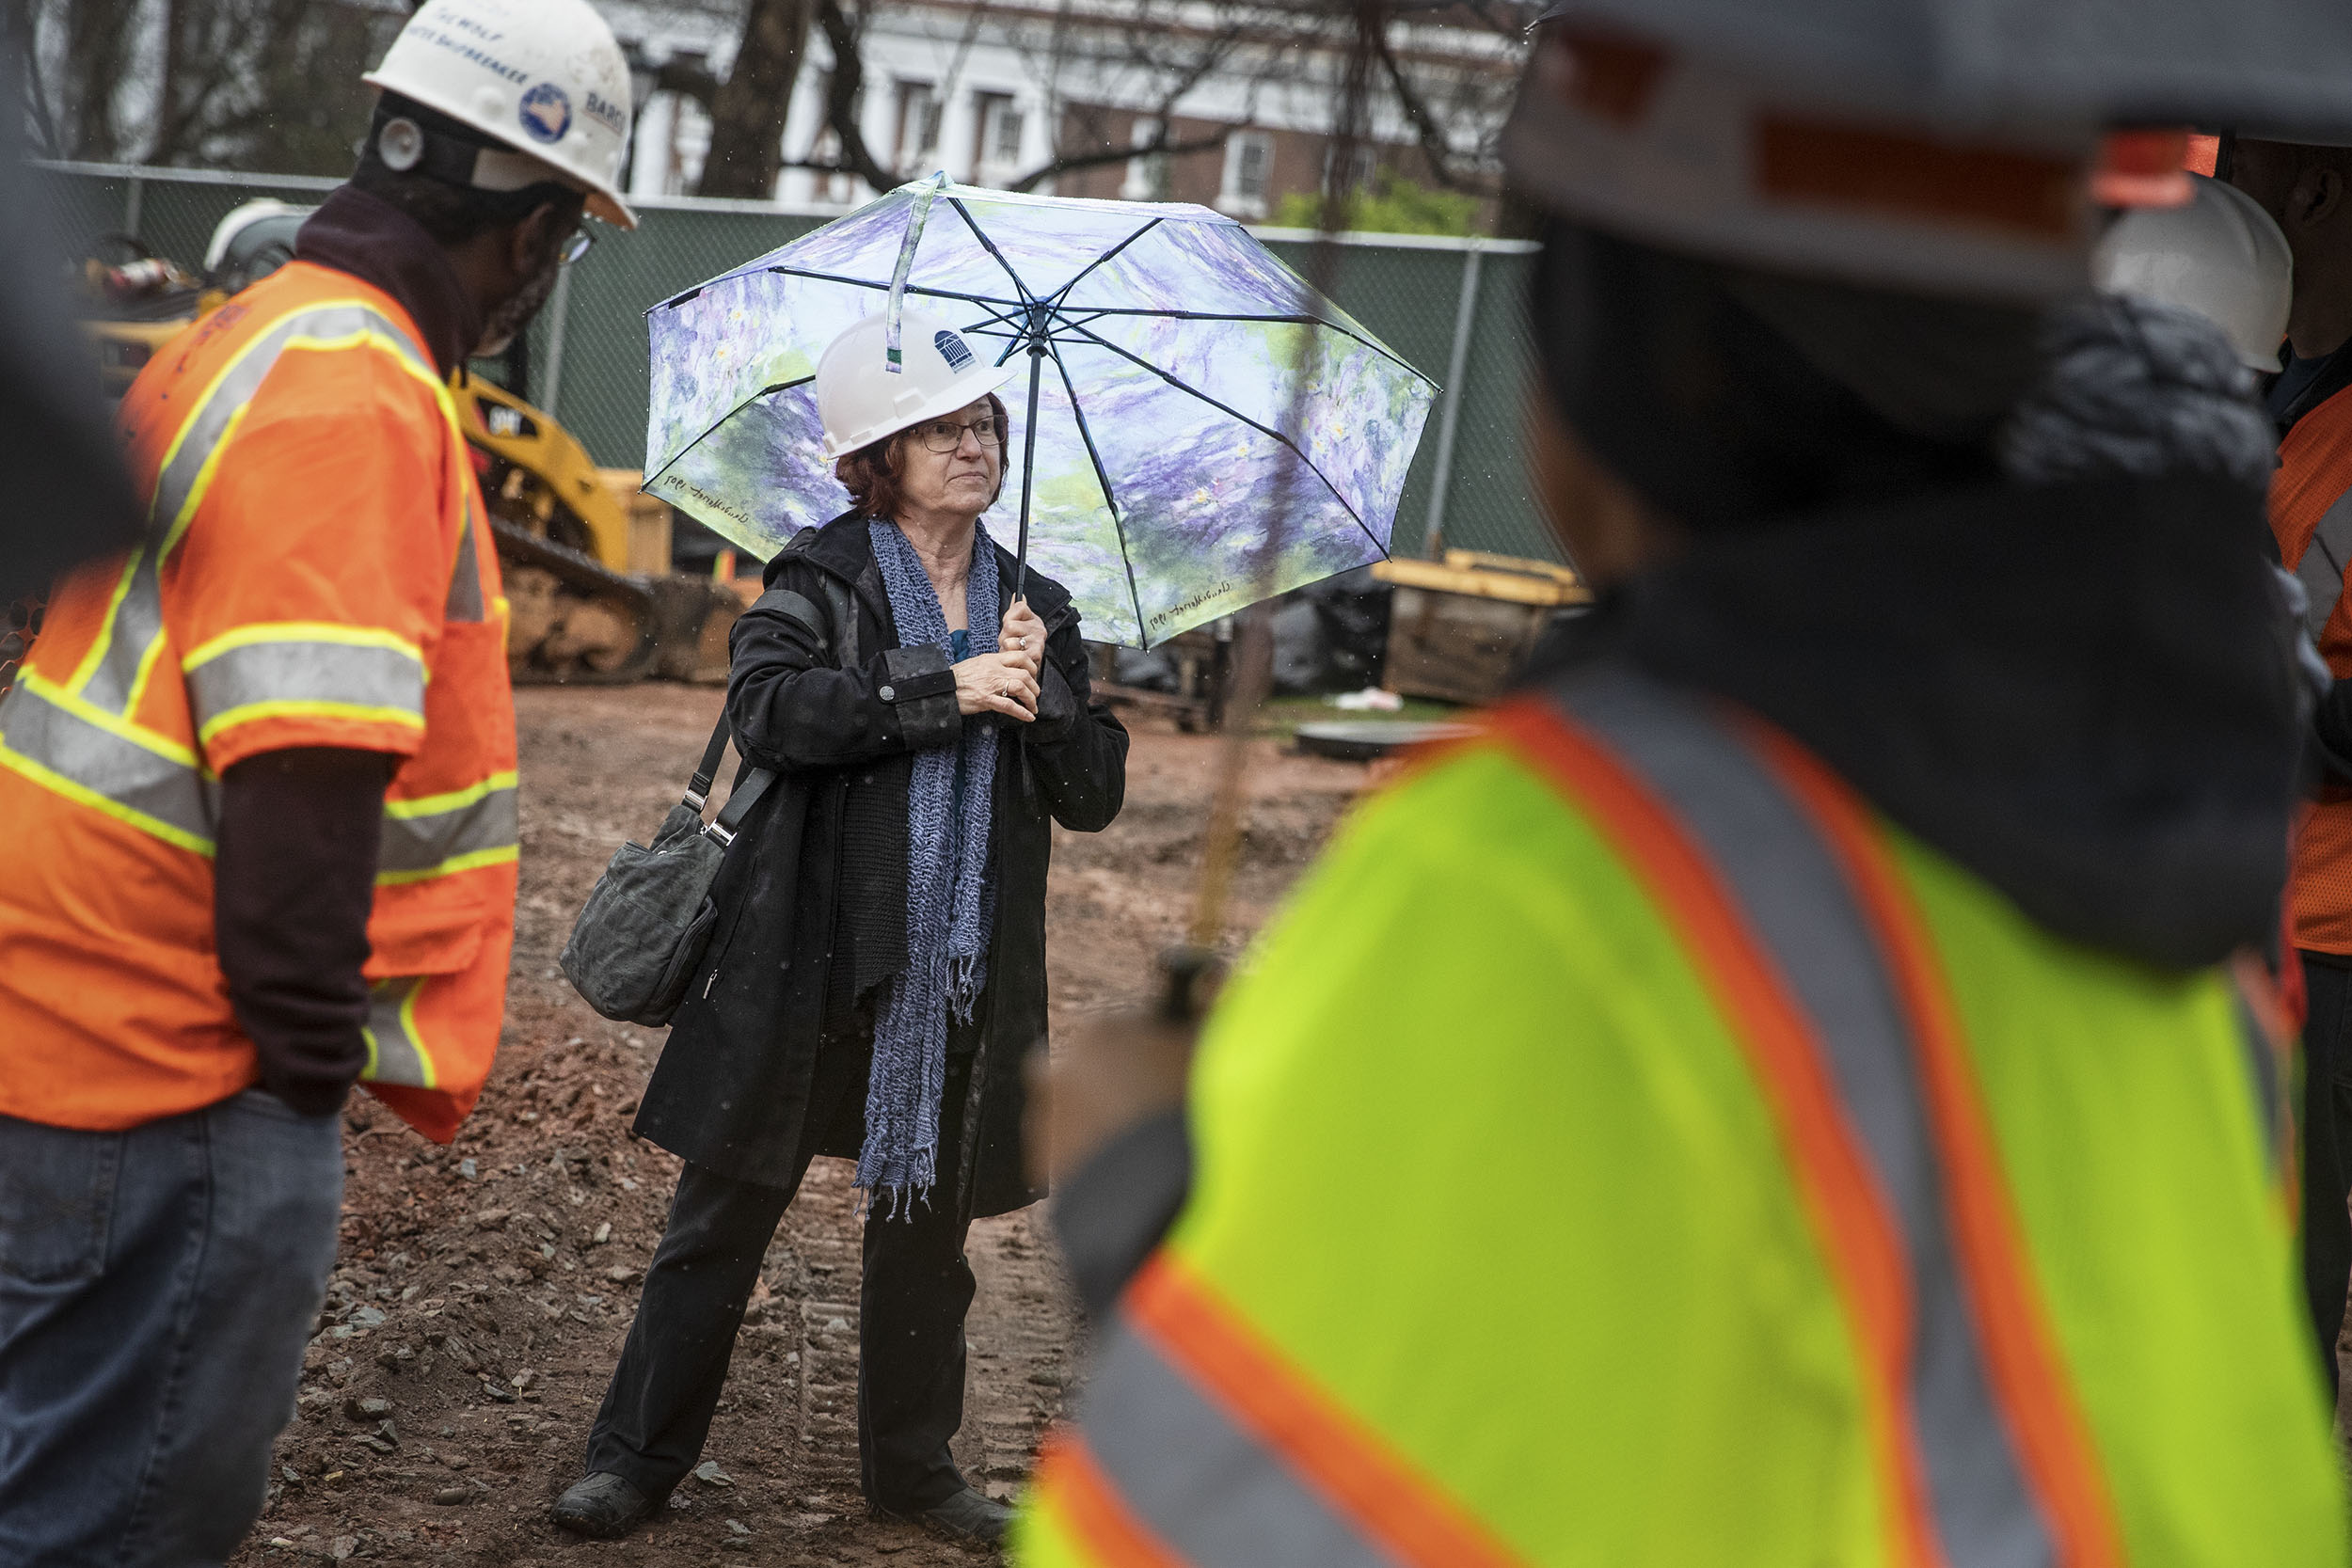 Mary Hughes surveying construction project while construction workers work